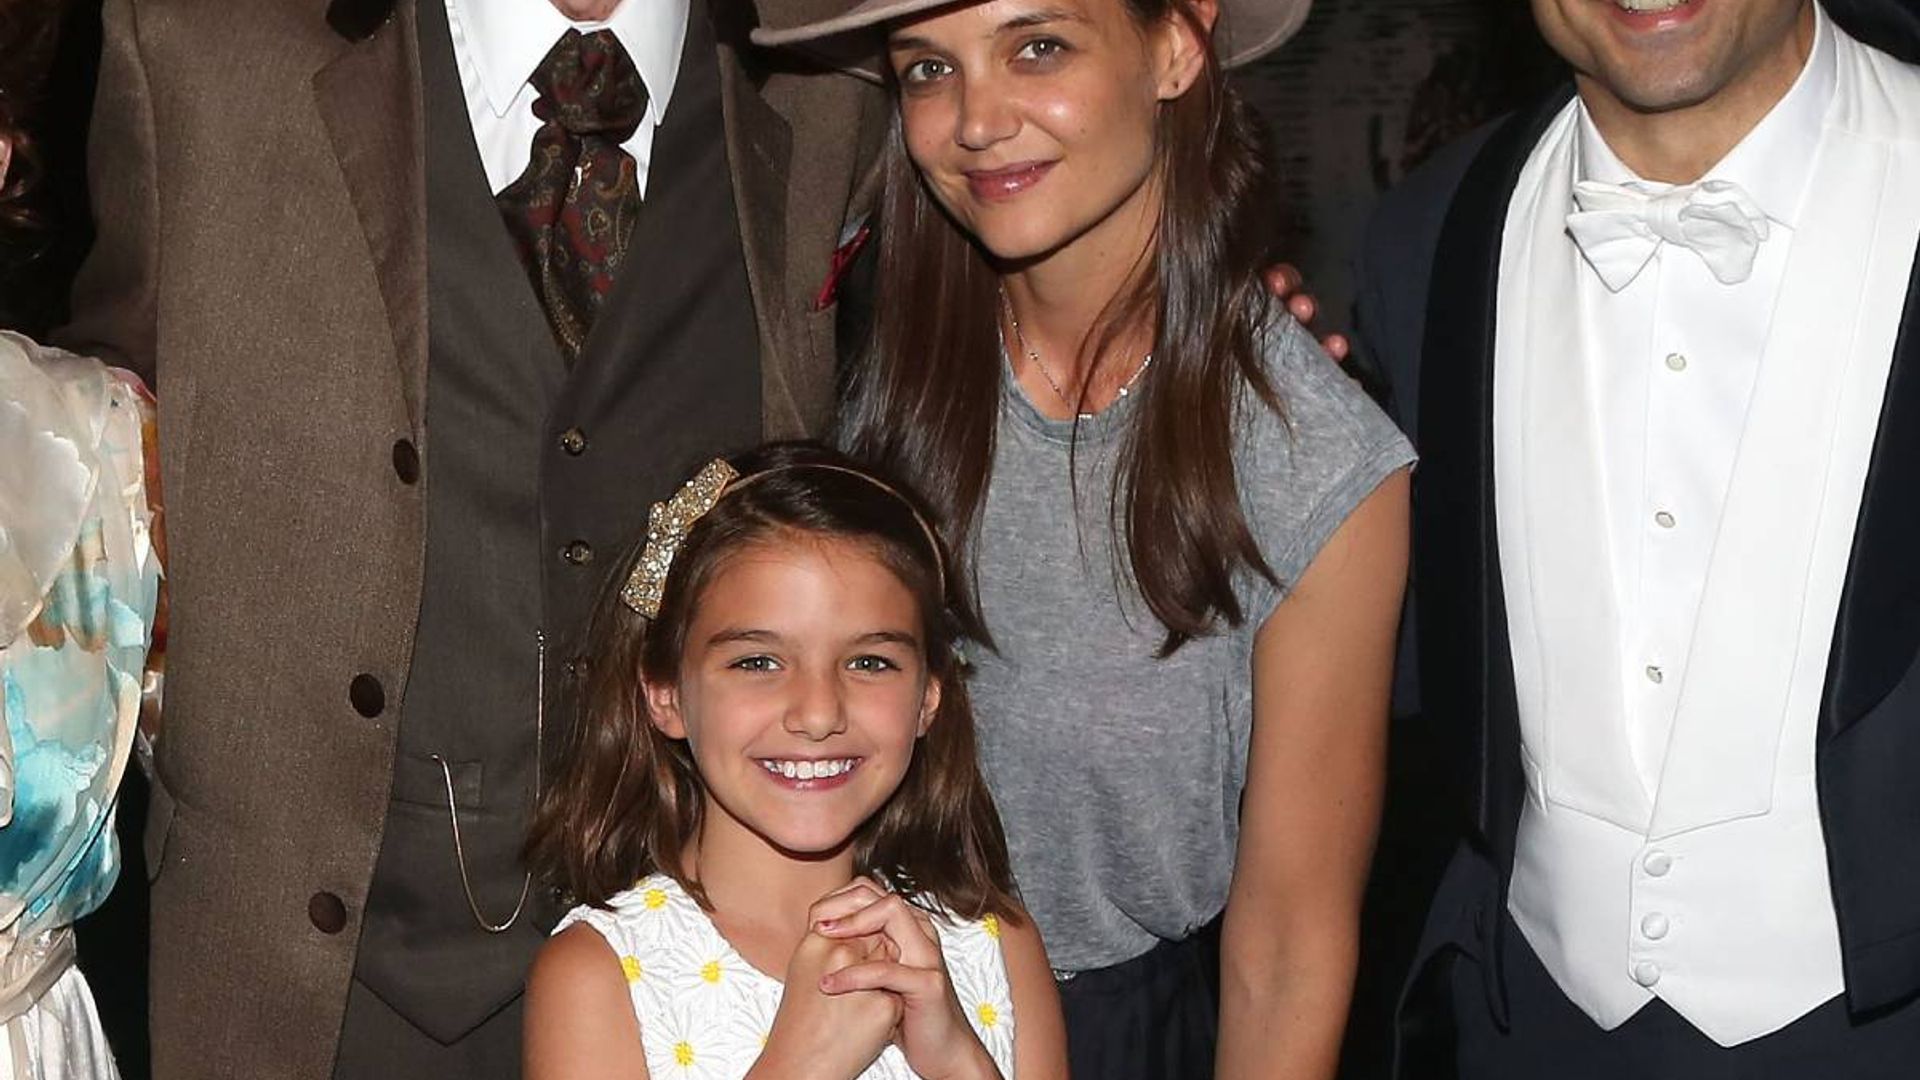 Katie Holmes Artistic Daughter Suri Features In Stars Latest Post And Fans React Hello 